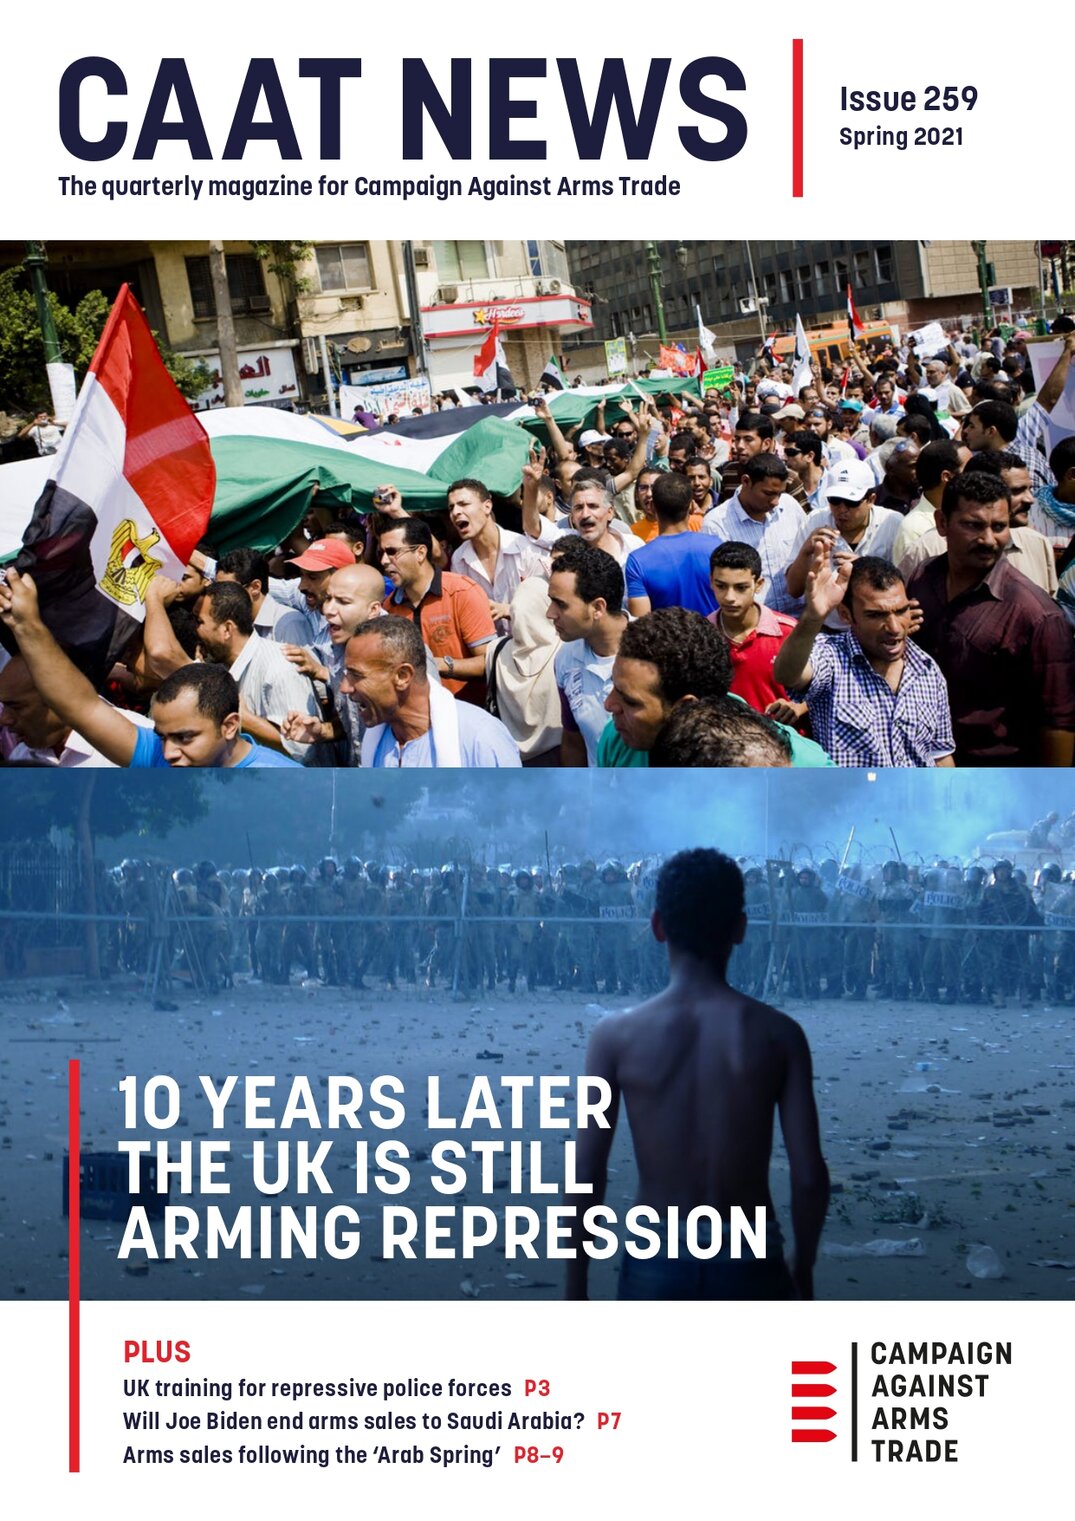 Cover of CAAT News issue 259 with image of Arab Spring protests and headline "10 years later the UK is still arming repression"